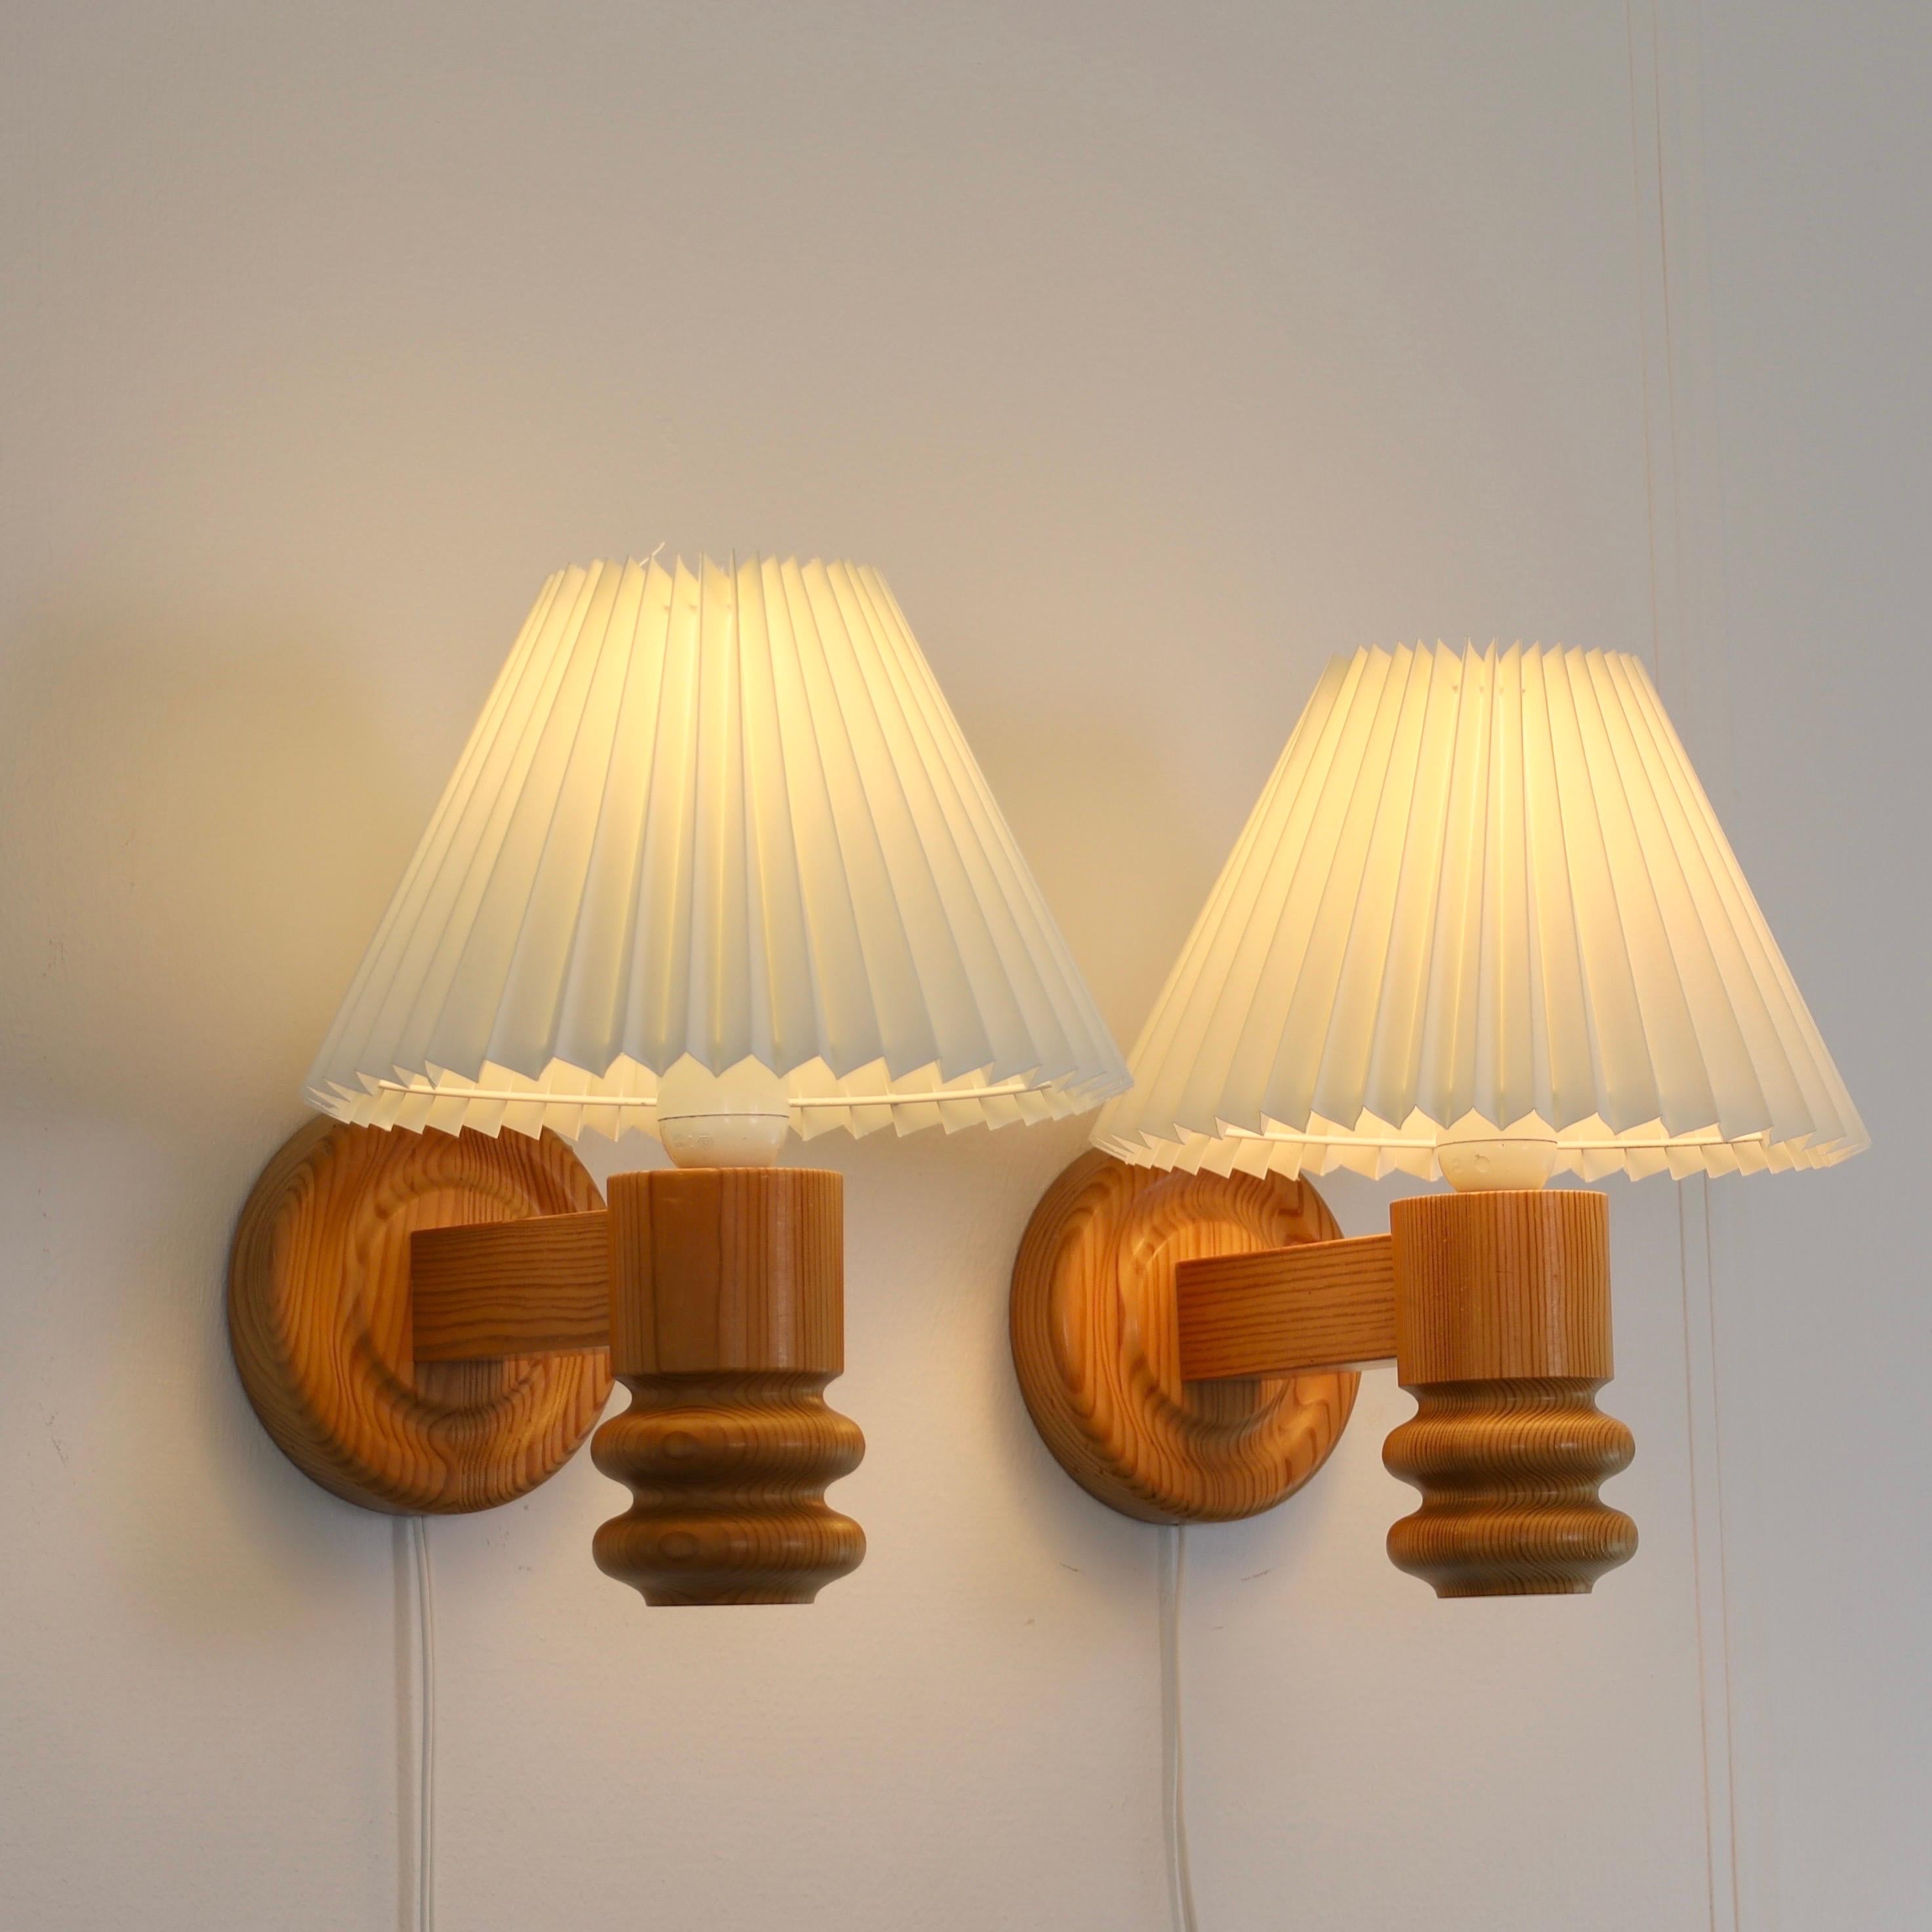 Set of Swedish Pine Wood Wall Lamps by Solbackens Svarveri, Sweden, 1970s For Sale 10